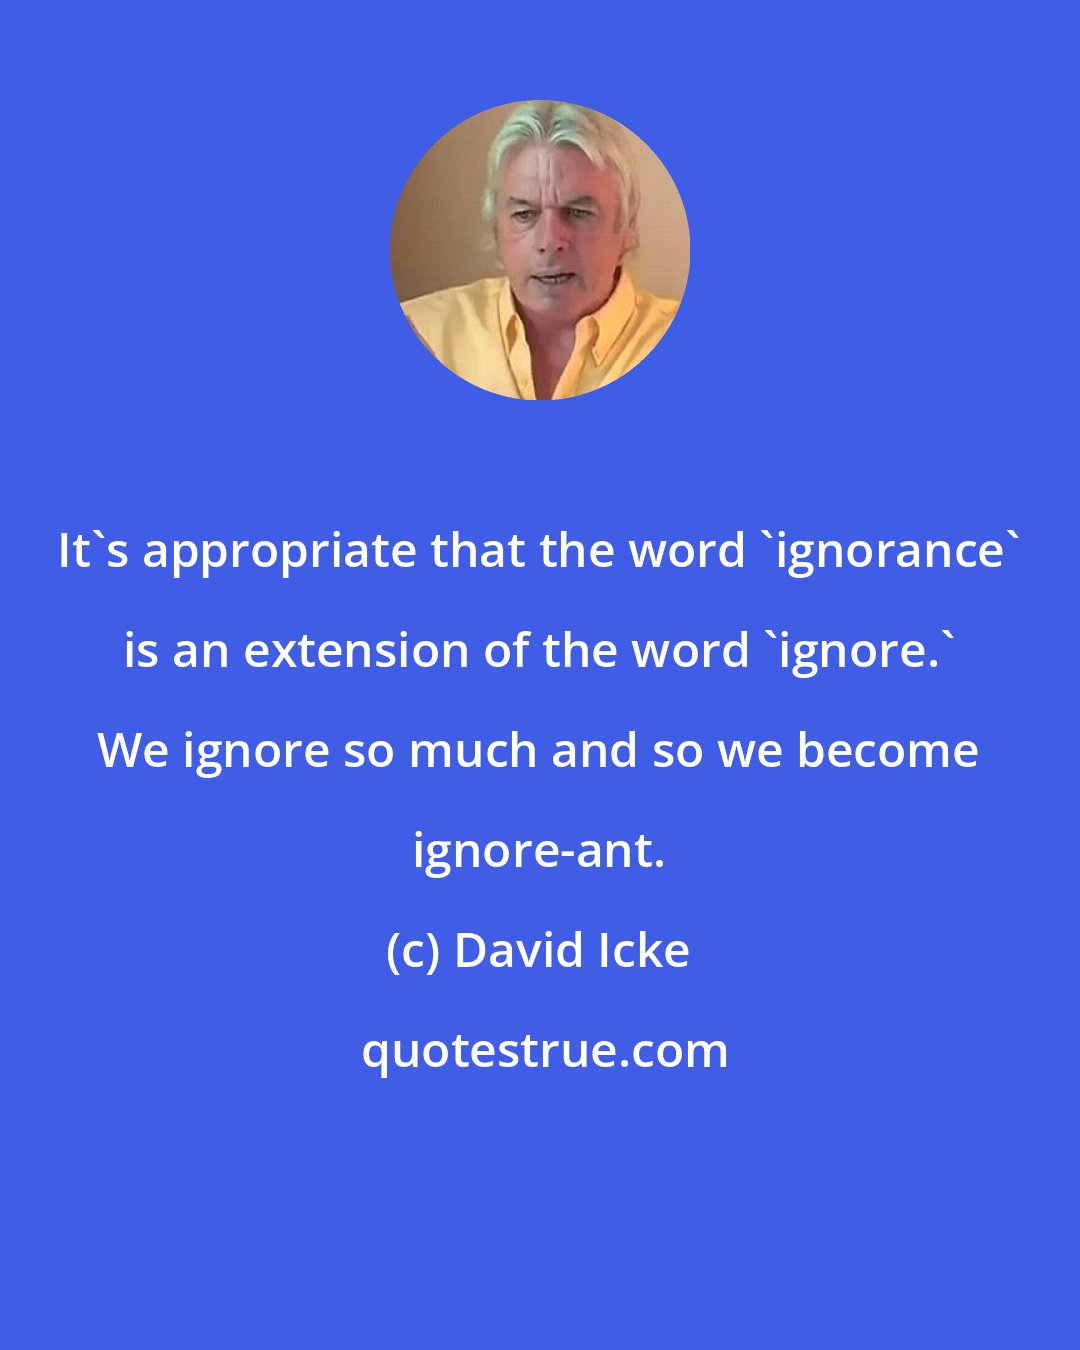 David Icke: It's appropriate that the word 'ignorance' is an extension of the word 'ignore.' We ignore so much and so we become ignore-ant.